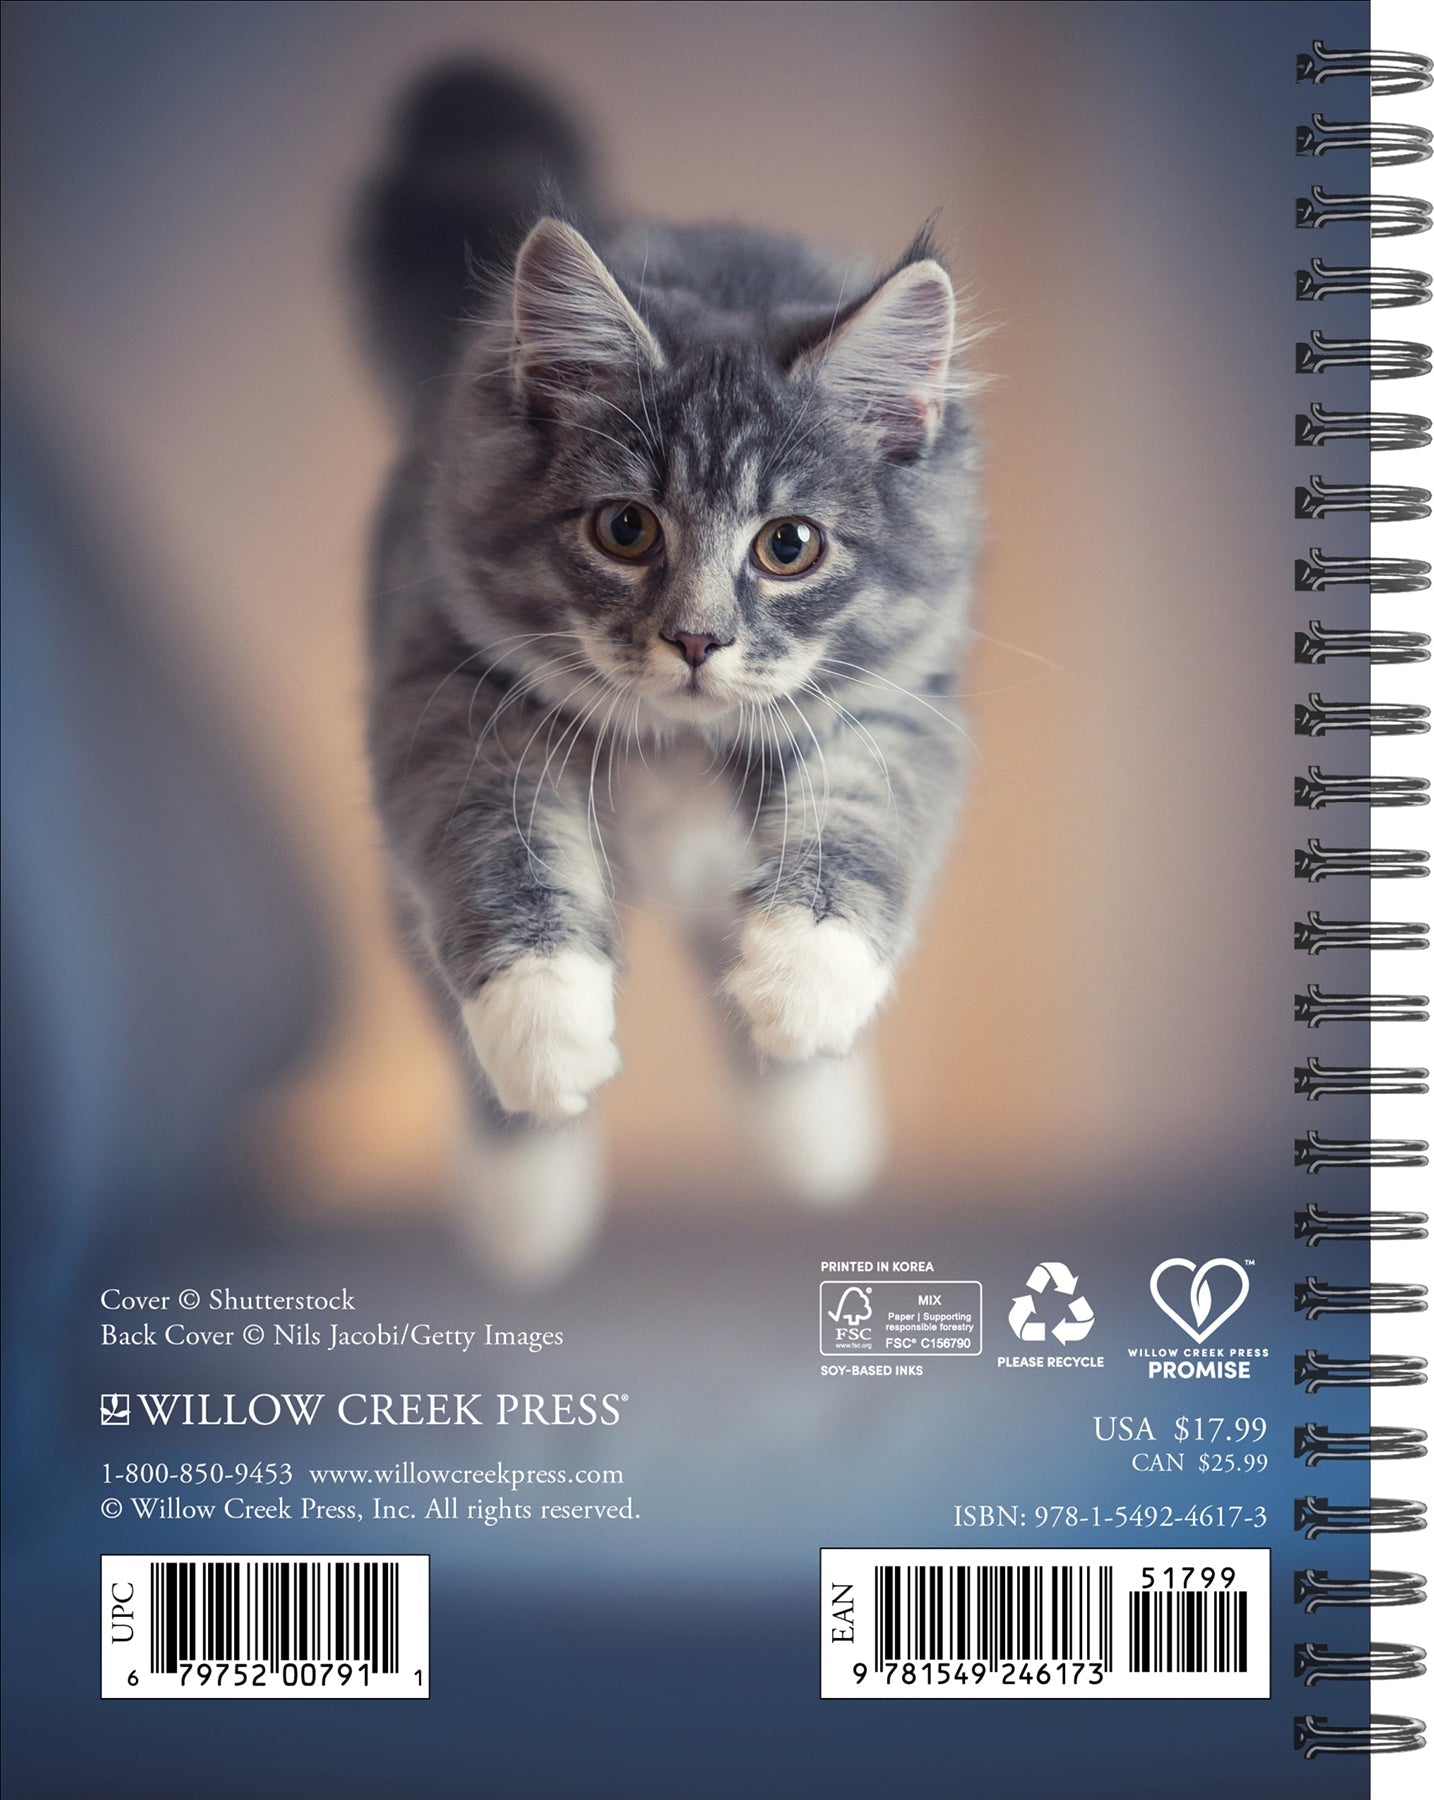 2025 What Cats Teach Us - Weekly Diary/Planner